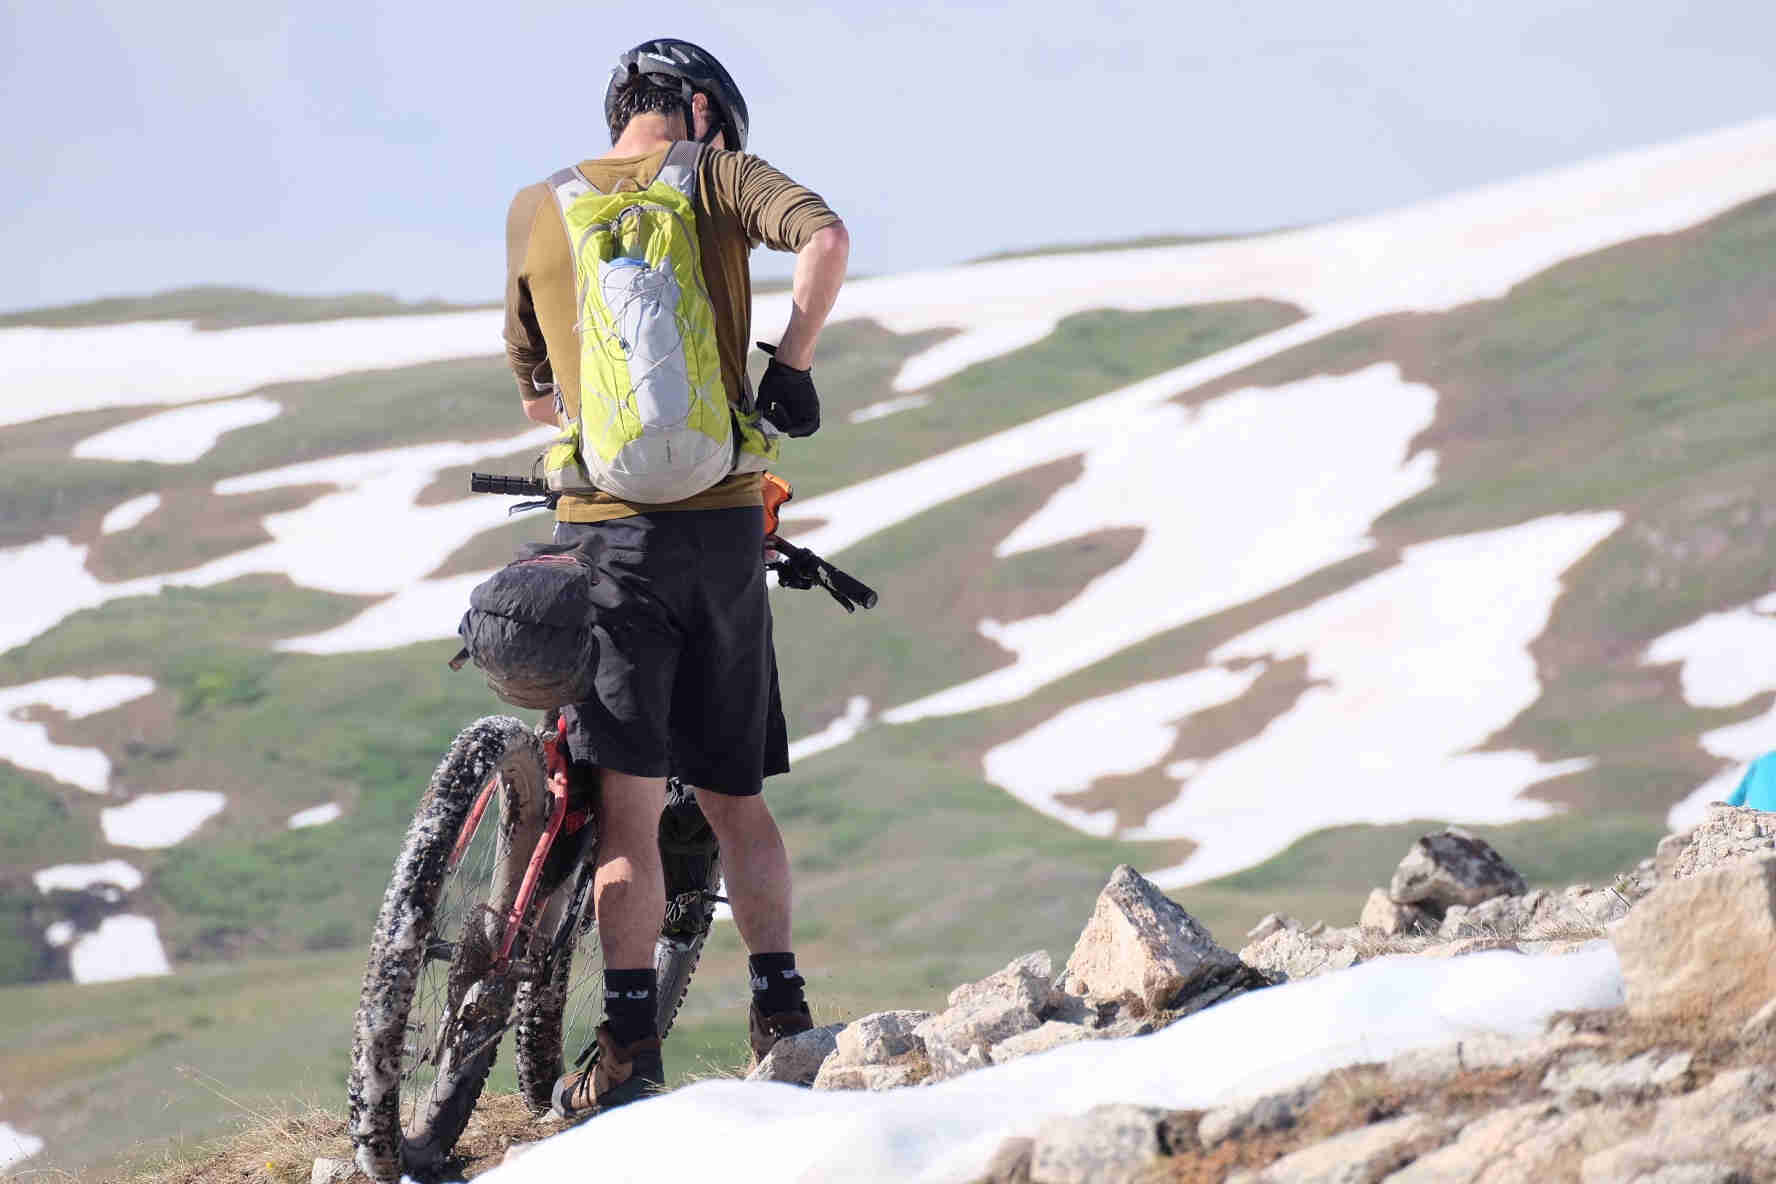 Rear view of a cyclist standing with a bike while adjusting a backpack strap, on a rocky hill in the mountains